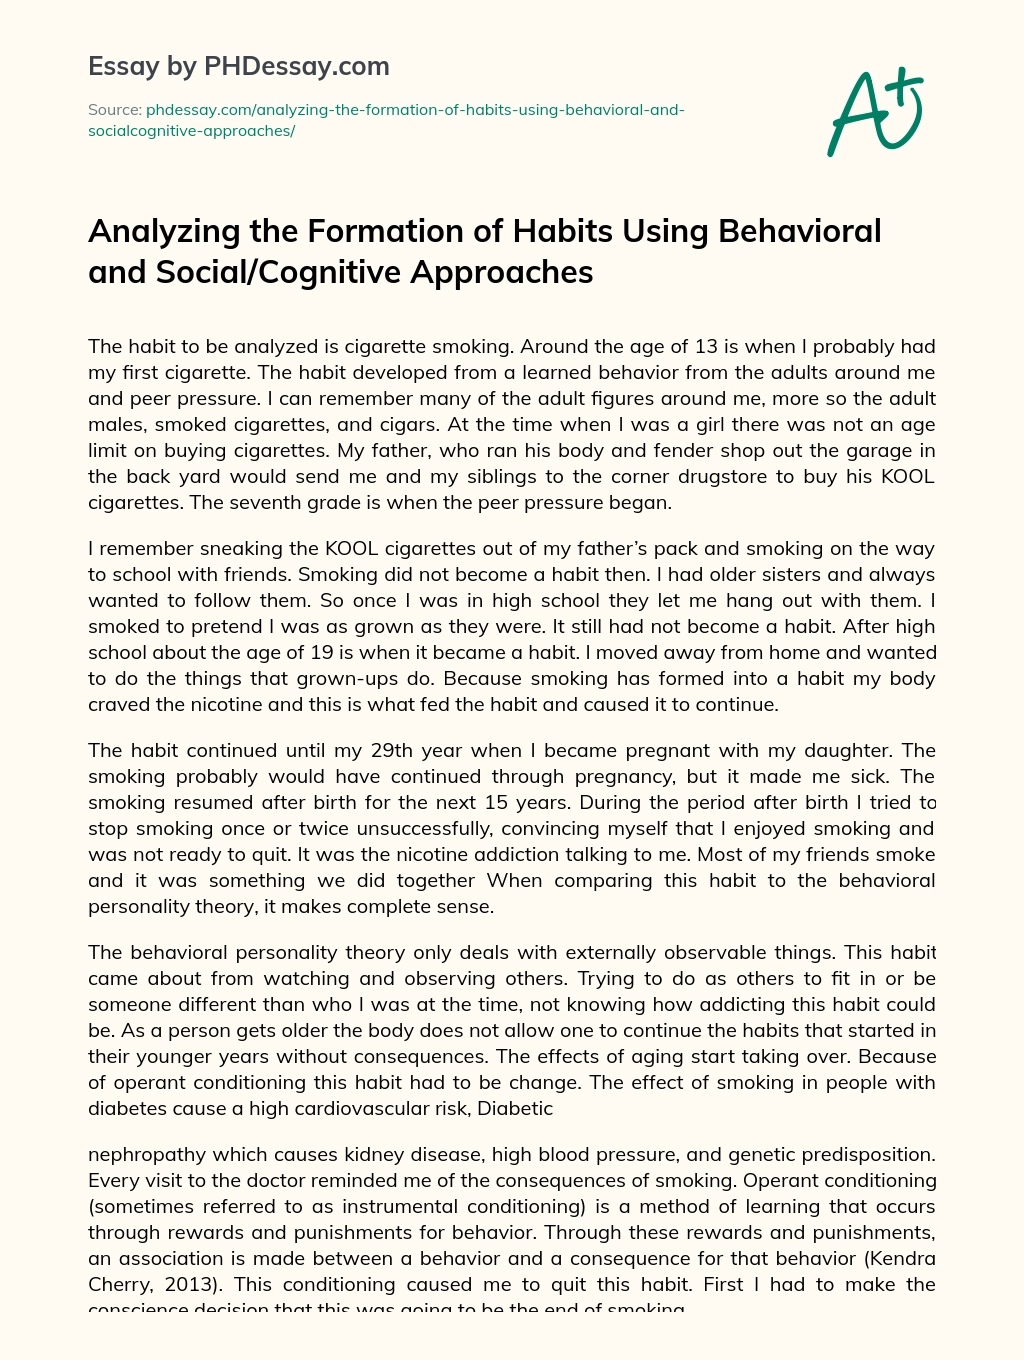 Analyzing the Formation of Habits Using Behavioral and Social/Cognitive Approaches essay